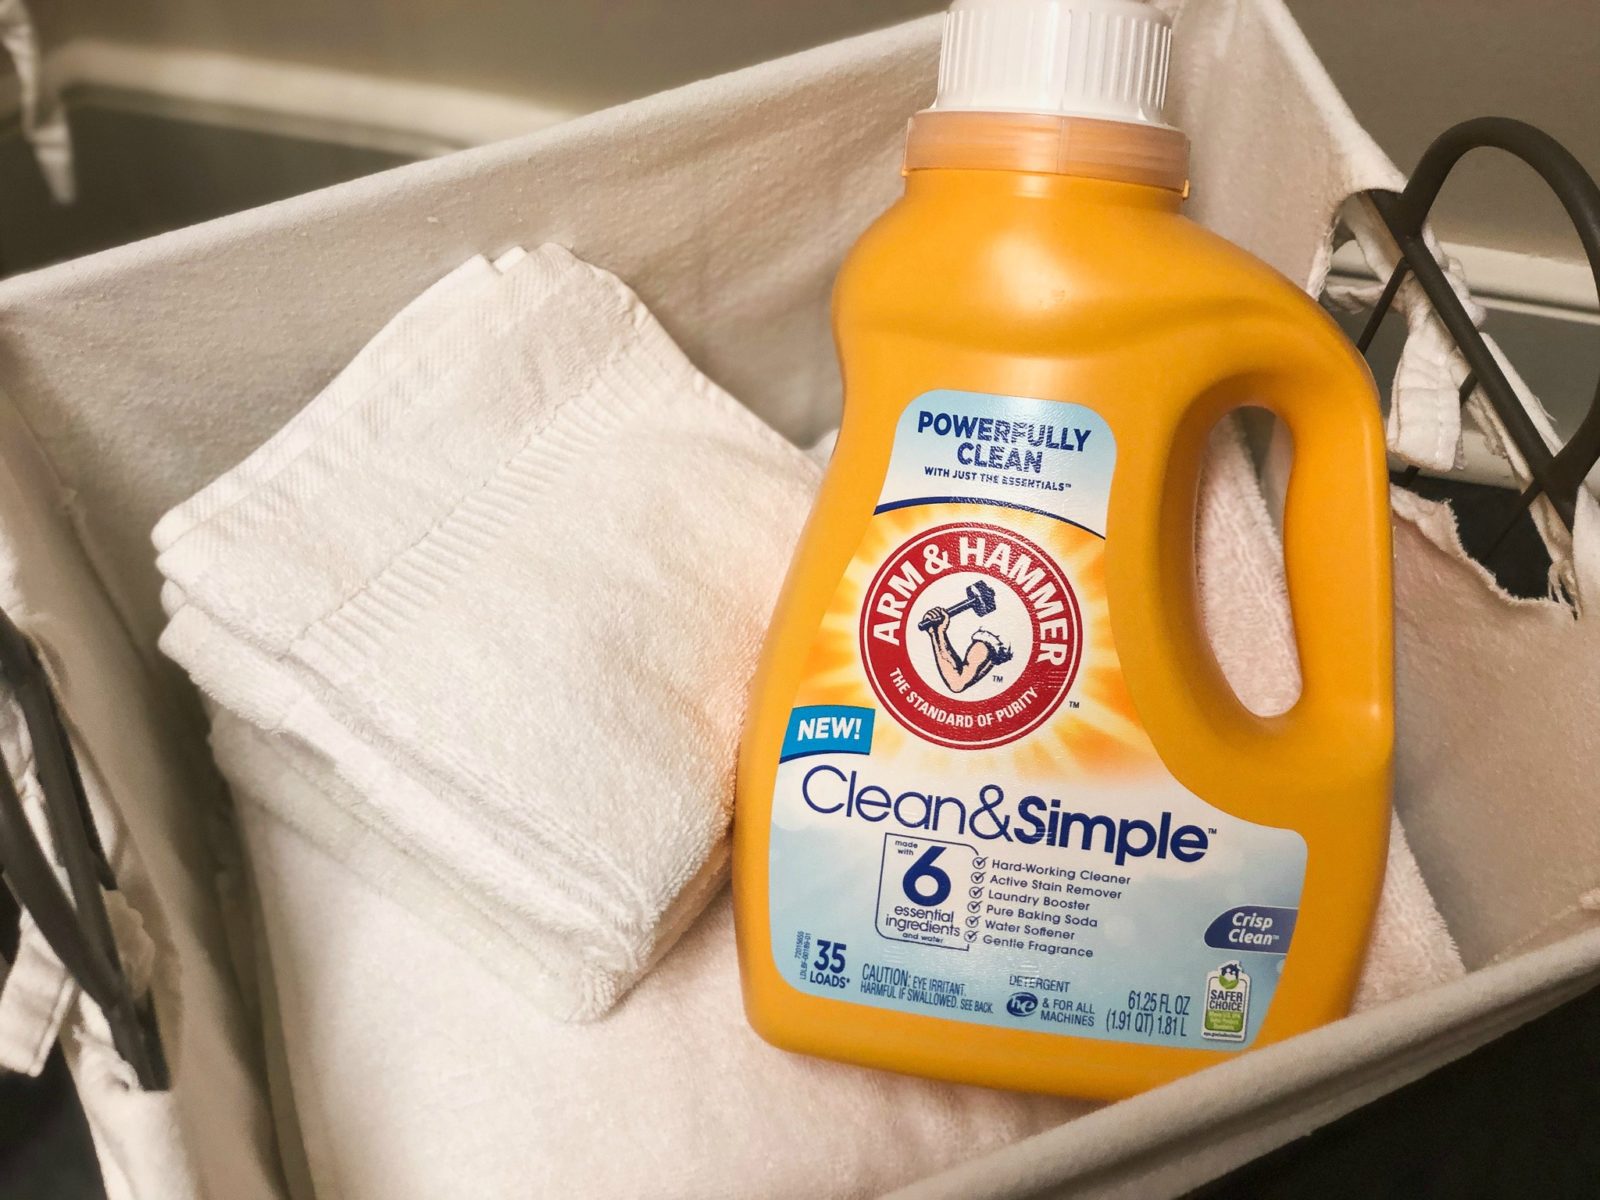 Arm And Hammer Liquid Laundry Detergent As Low As 75¢ At Kroger